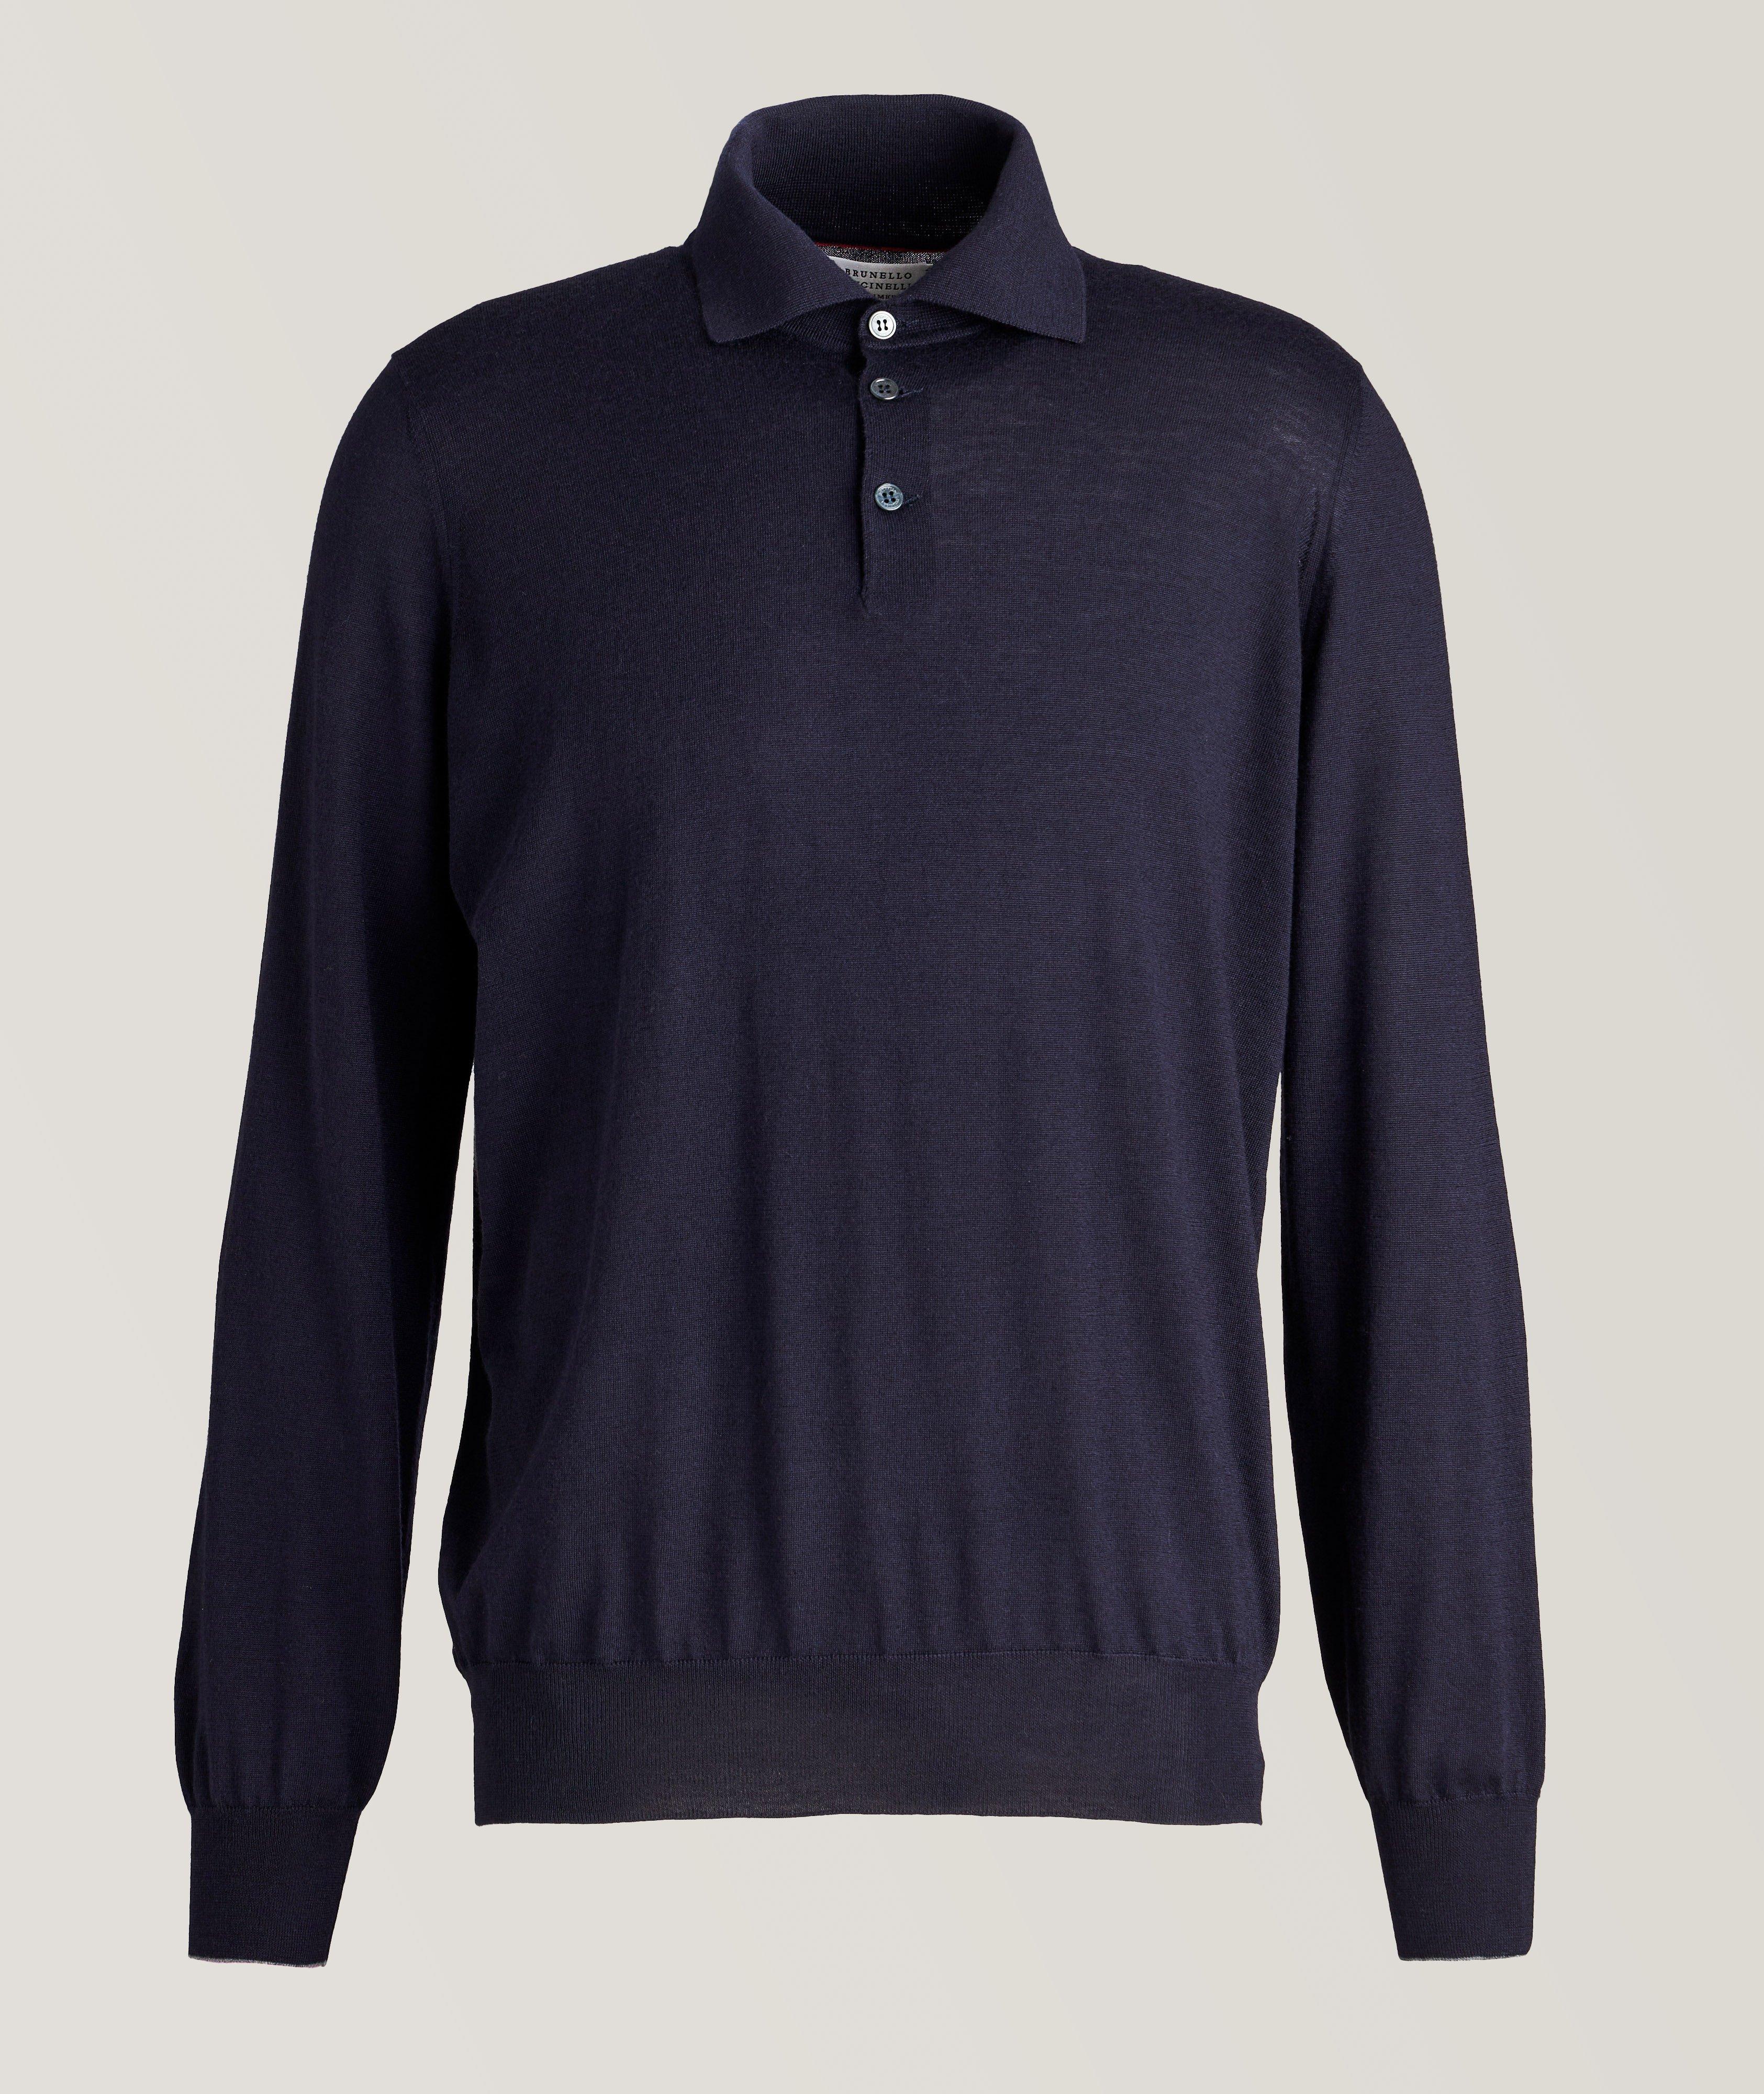 Fine Gauge Wool-Cashmere Knitted Polo  image 0